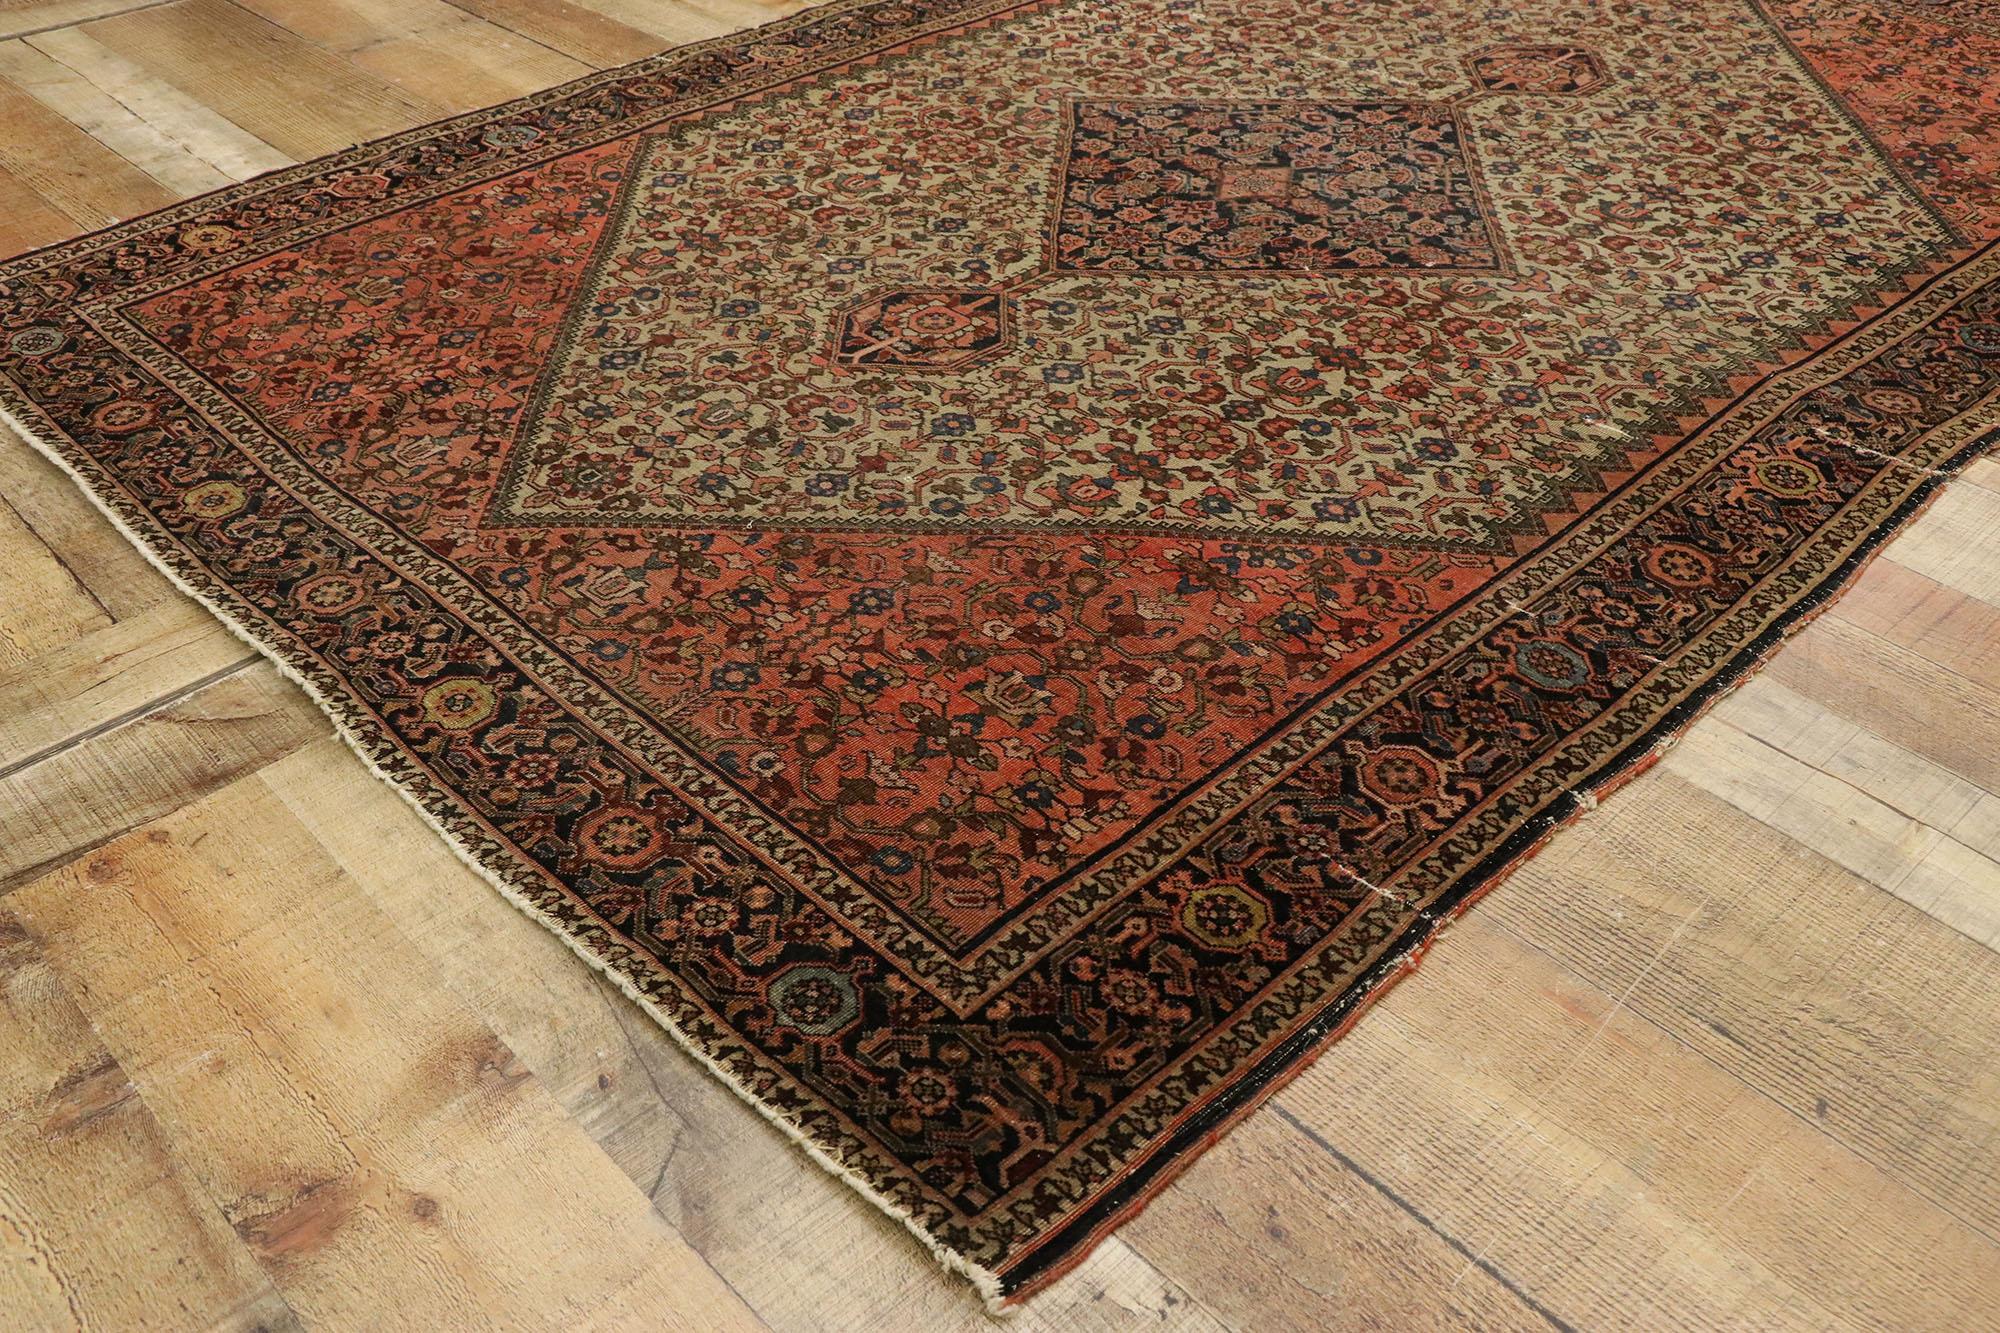 20th Century Distressed Antique Persian Farahan Rug withy Rustic Craftsman Style For Sale